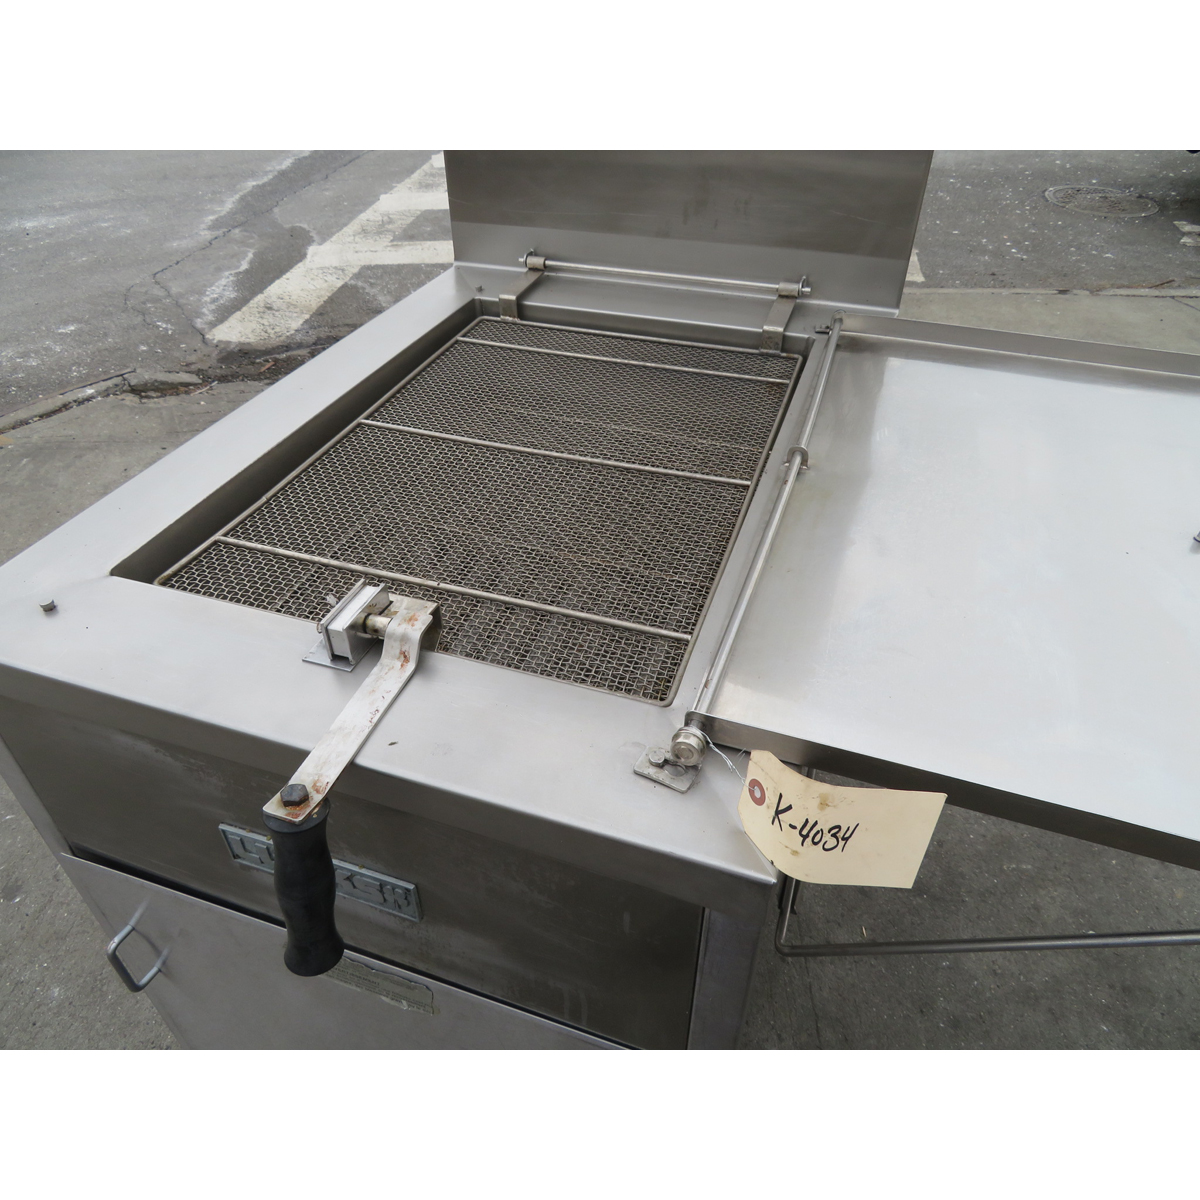 Lucks G1826 Gas Donut Fryer with Filtration System, Used Good Condition image 2